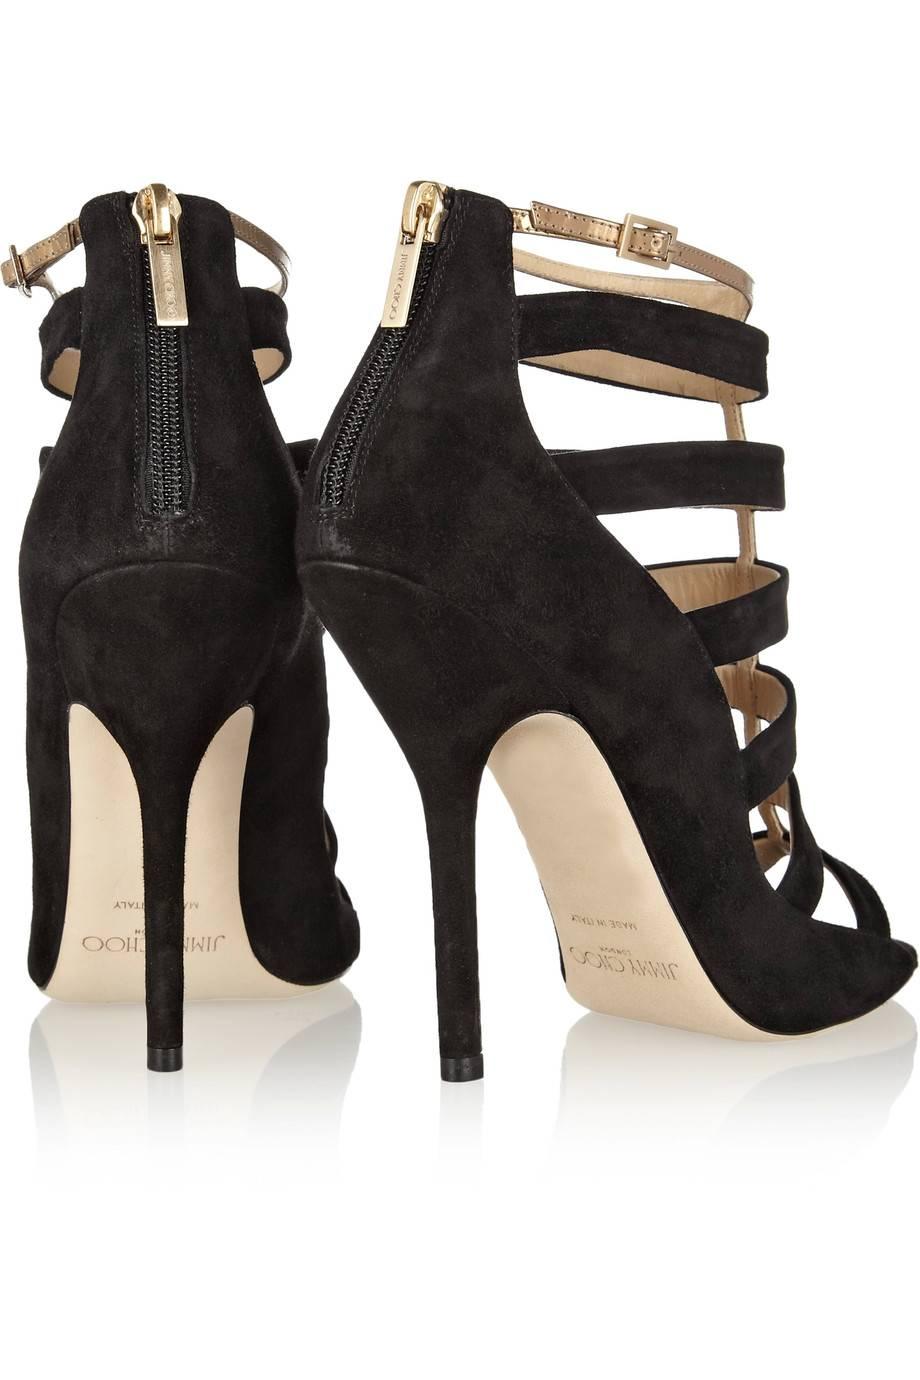 Women's Jimmy Choo New Black Suede Gold Detail Cut Out Evening Heels Sandals in Box 